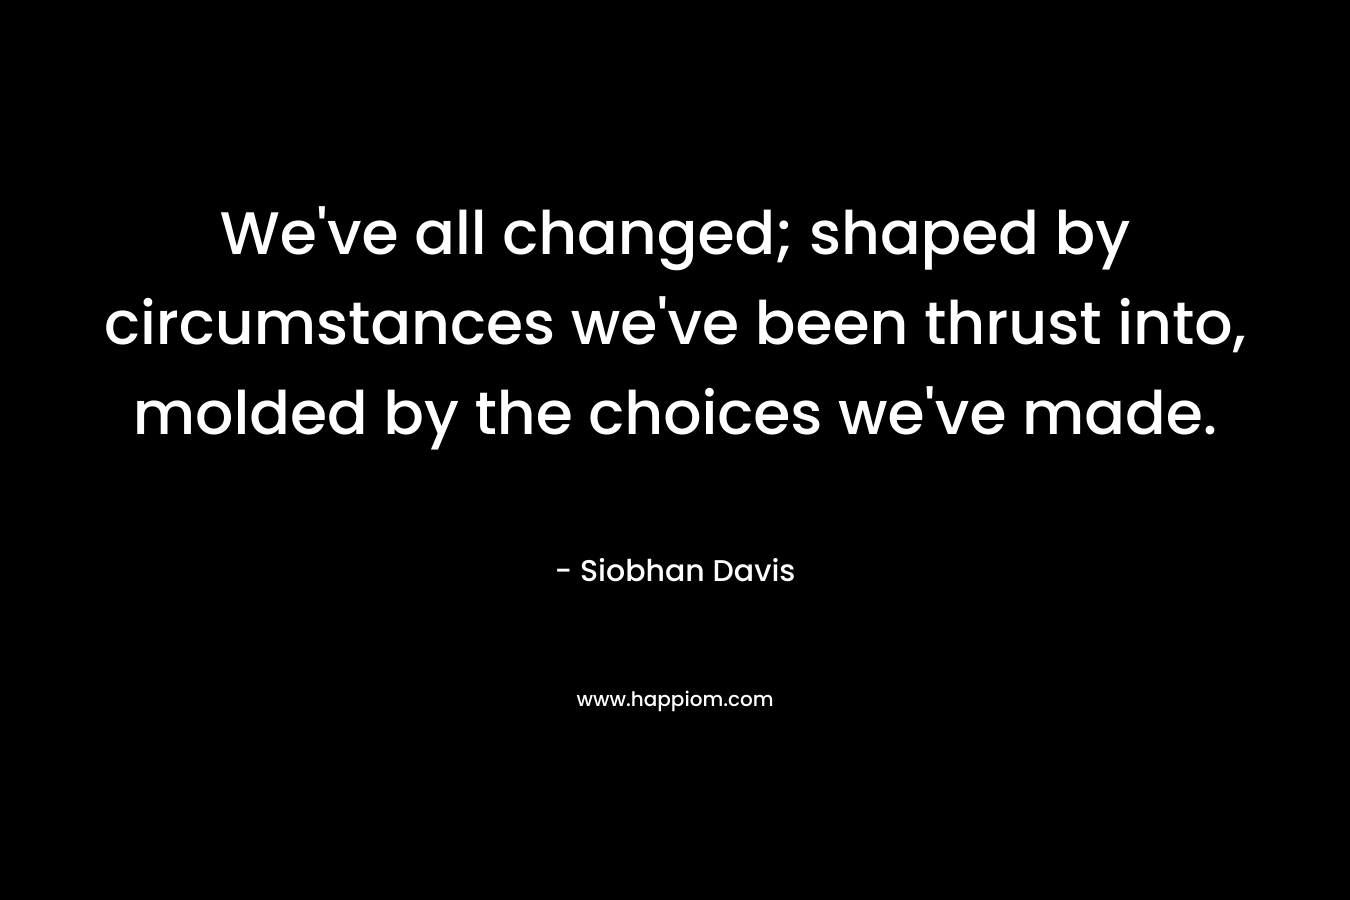 We’ve all changed; shaped by circumstances we’ve been thrust into, molded by the choices we’ve made. – Siobhan Davis